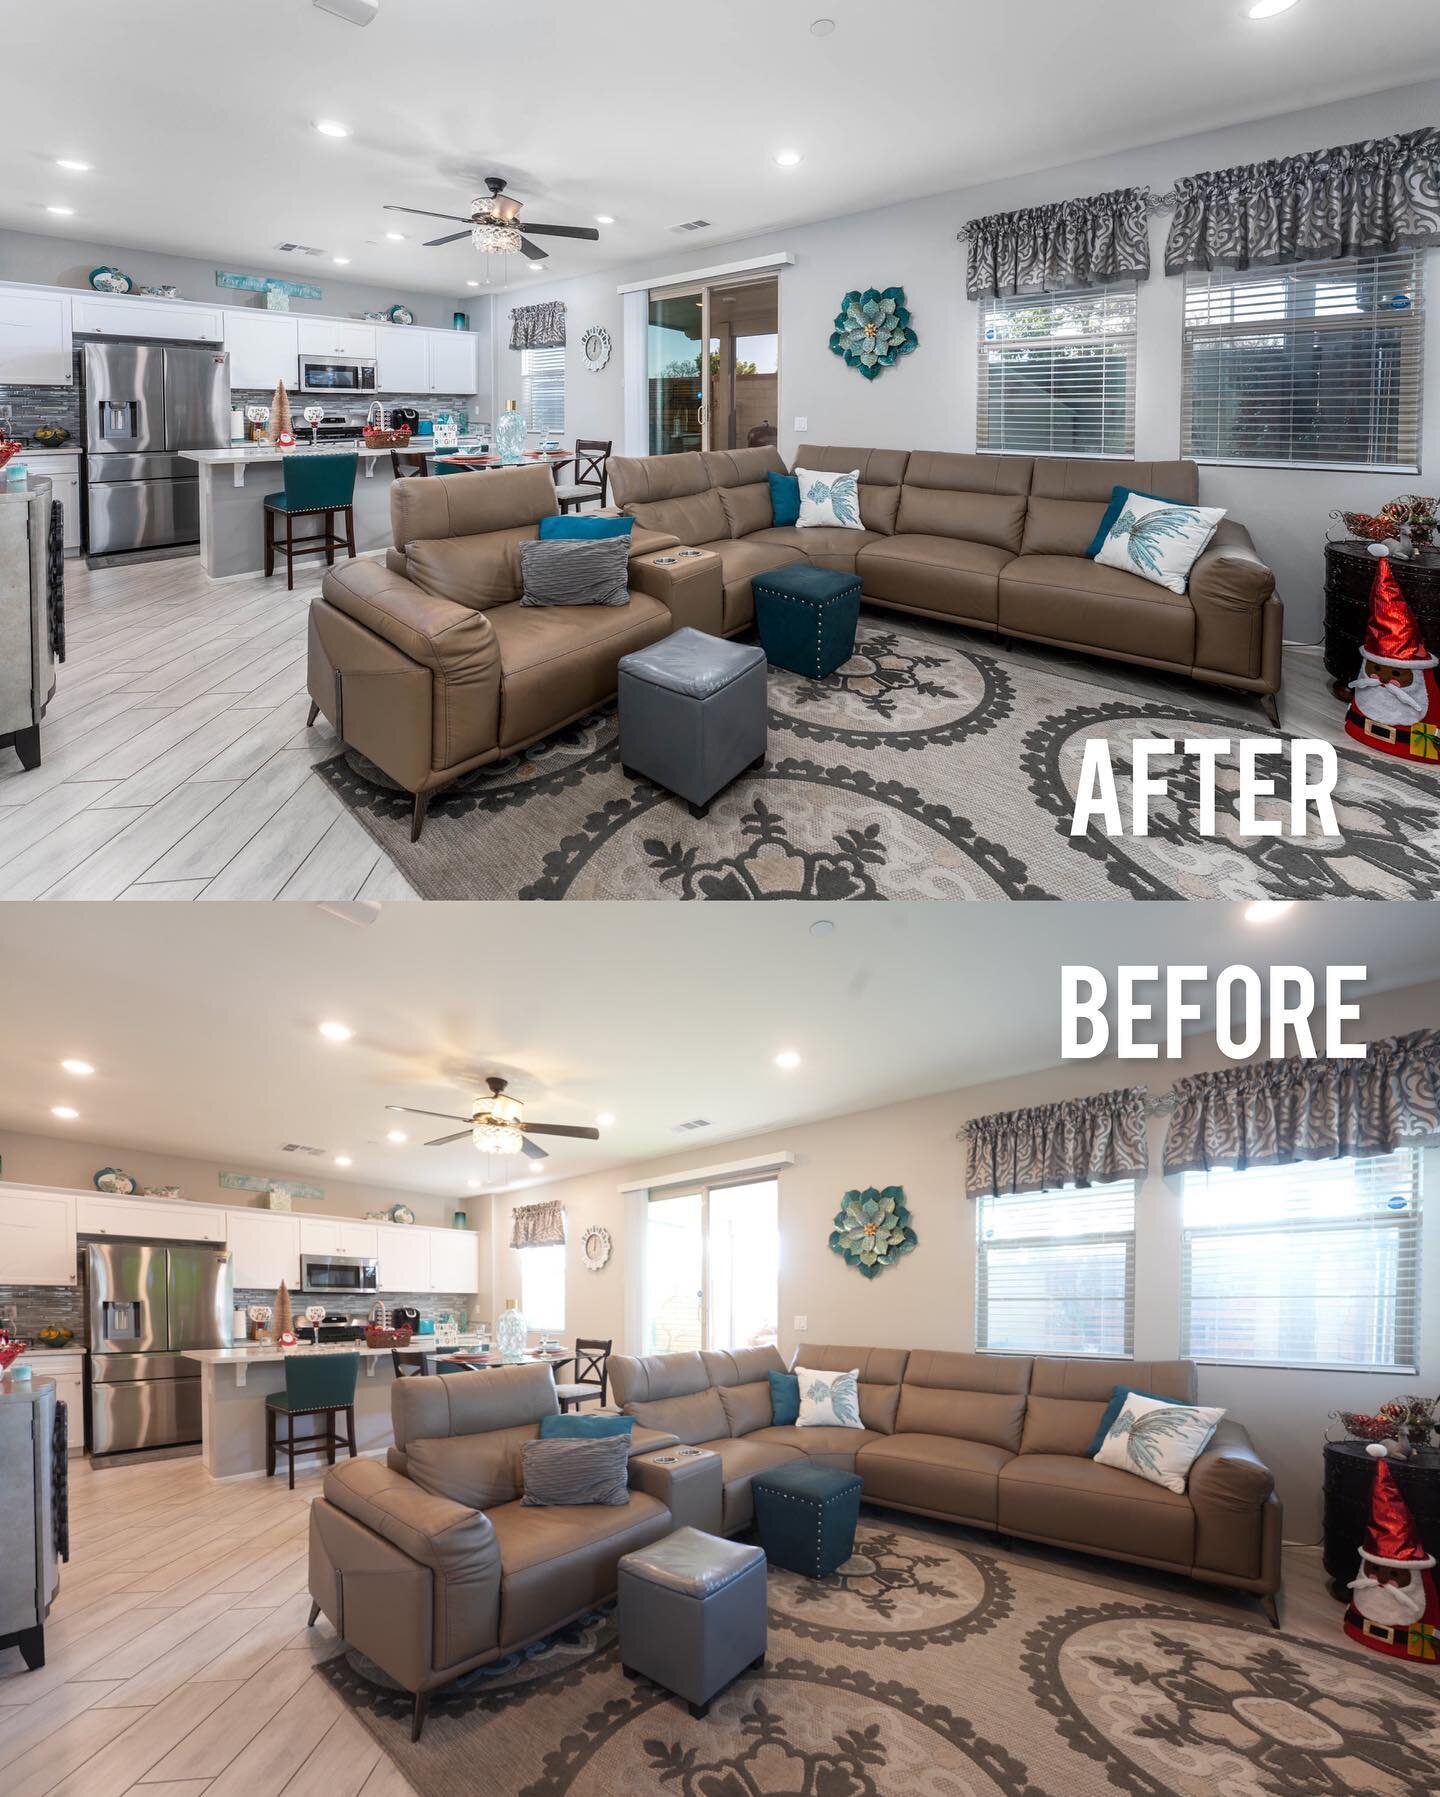 A little before and after of this great room of todays shoot 🔥
.

Looking for high quality photos/video for your next listing? DM @inlandrealestatephotography for details or go to www.inlandrealestatephotography.com
.
#riversiderealestatephotography